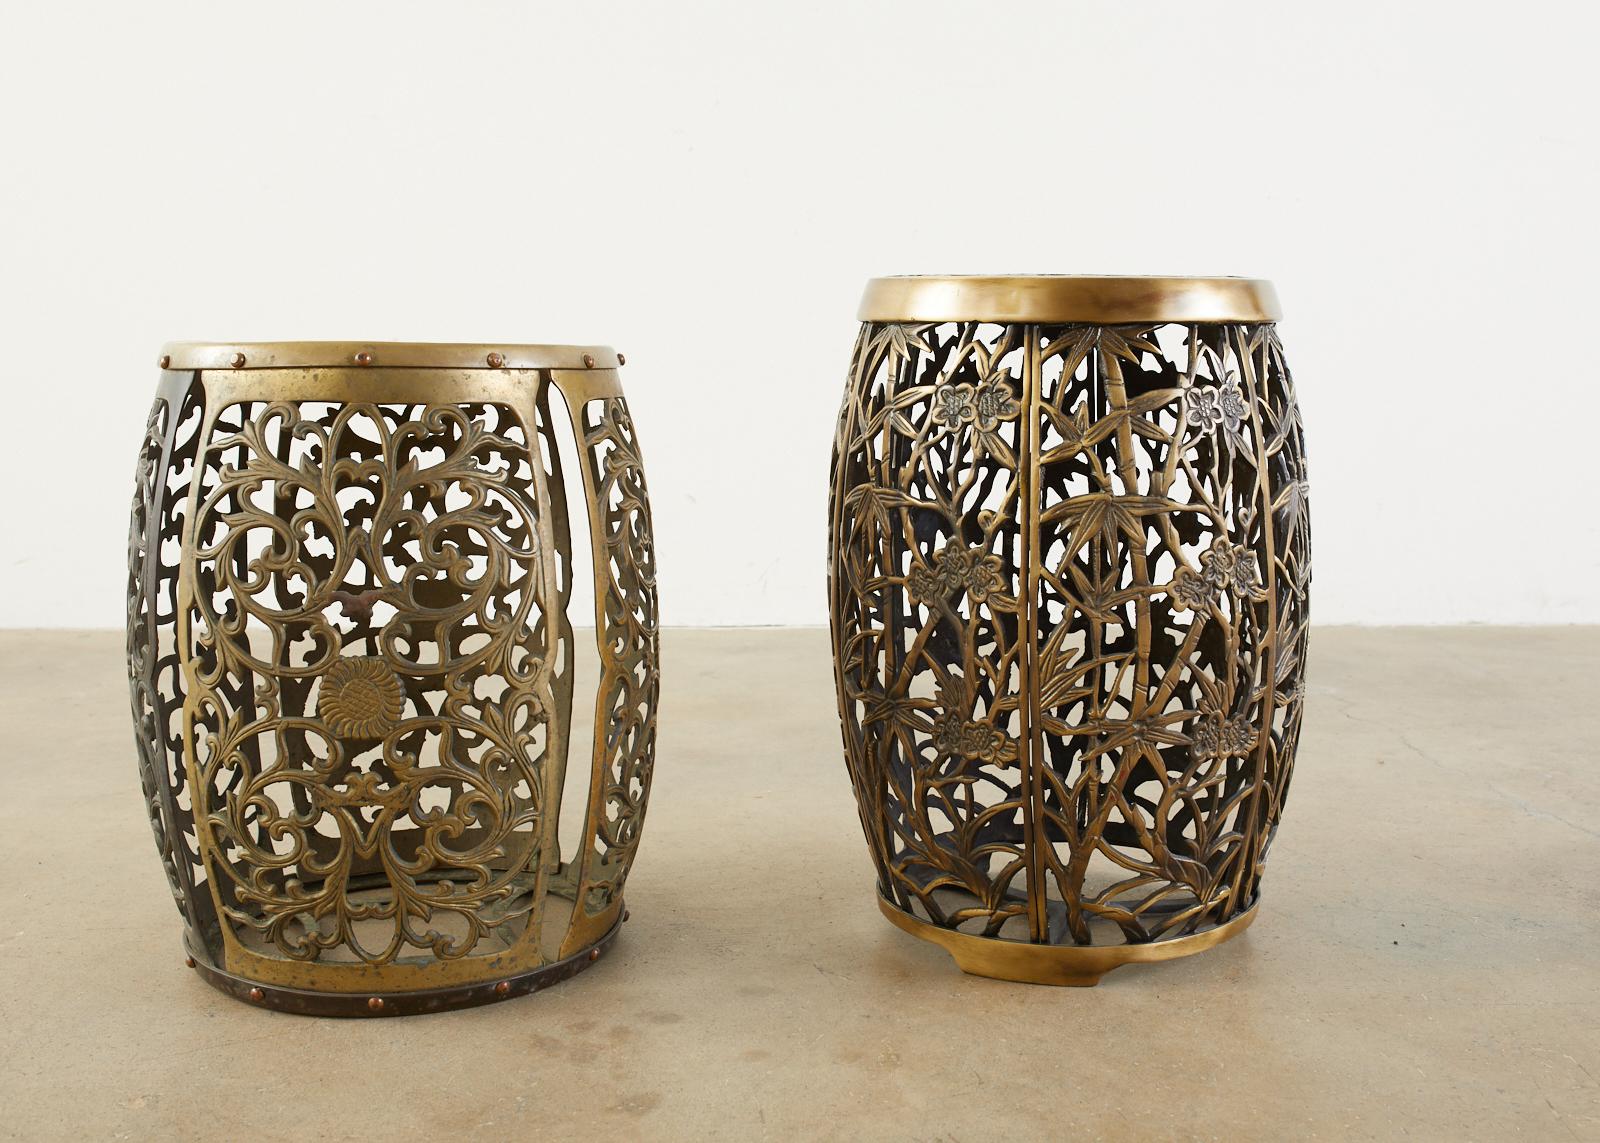 Associated pair of Chinese pierced brass drum garden stools or drink's tables. Made in the tabouret style featuring an elaborate open fretwork cage design of bamboo, foliage, and scroll patterns. One stool measures two inches higher than the other